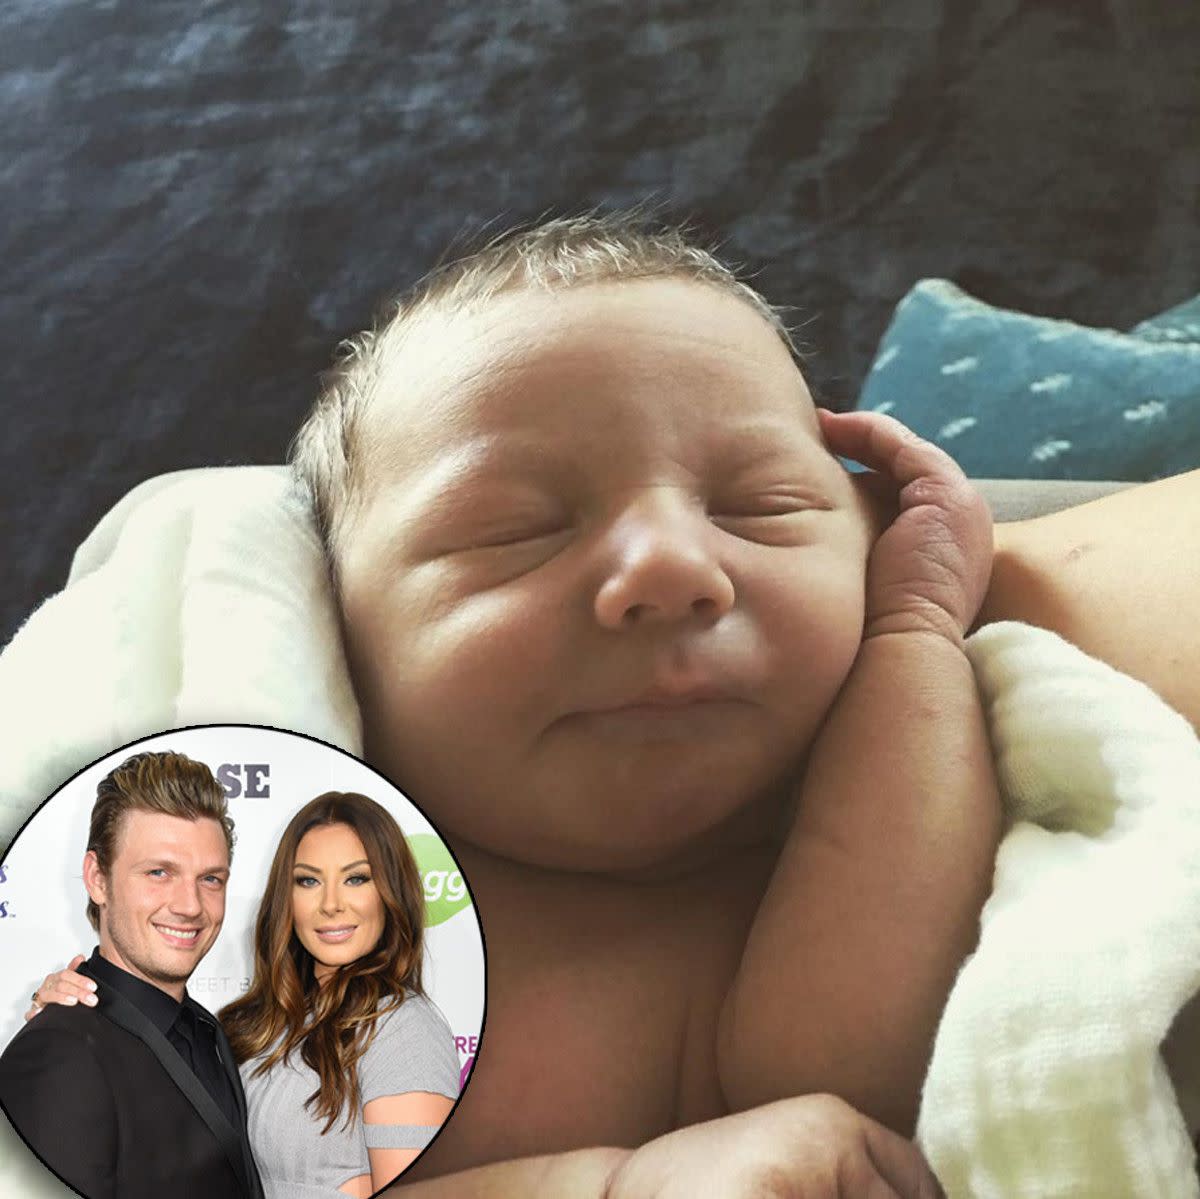 Looks like there's a new Backstreet Boy in town! Proud dad Nick Carter shared the first photo of his adorable 10-day-old son Odin Reign on April 29, 2016. "I just love how peaceful he is," the doting first-time dad captioned the photo of his son with wife Lauren Kitt. "Daddy will be home soon Odin."